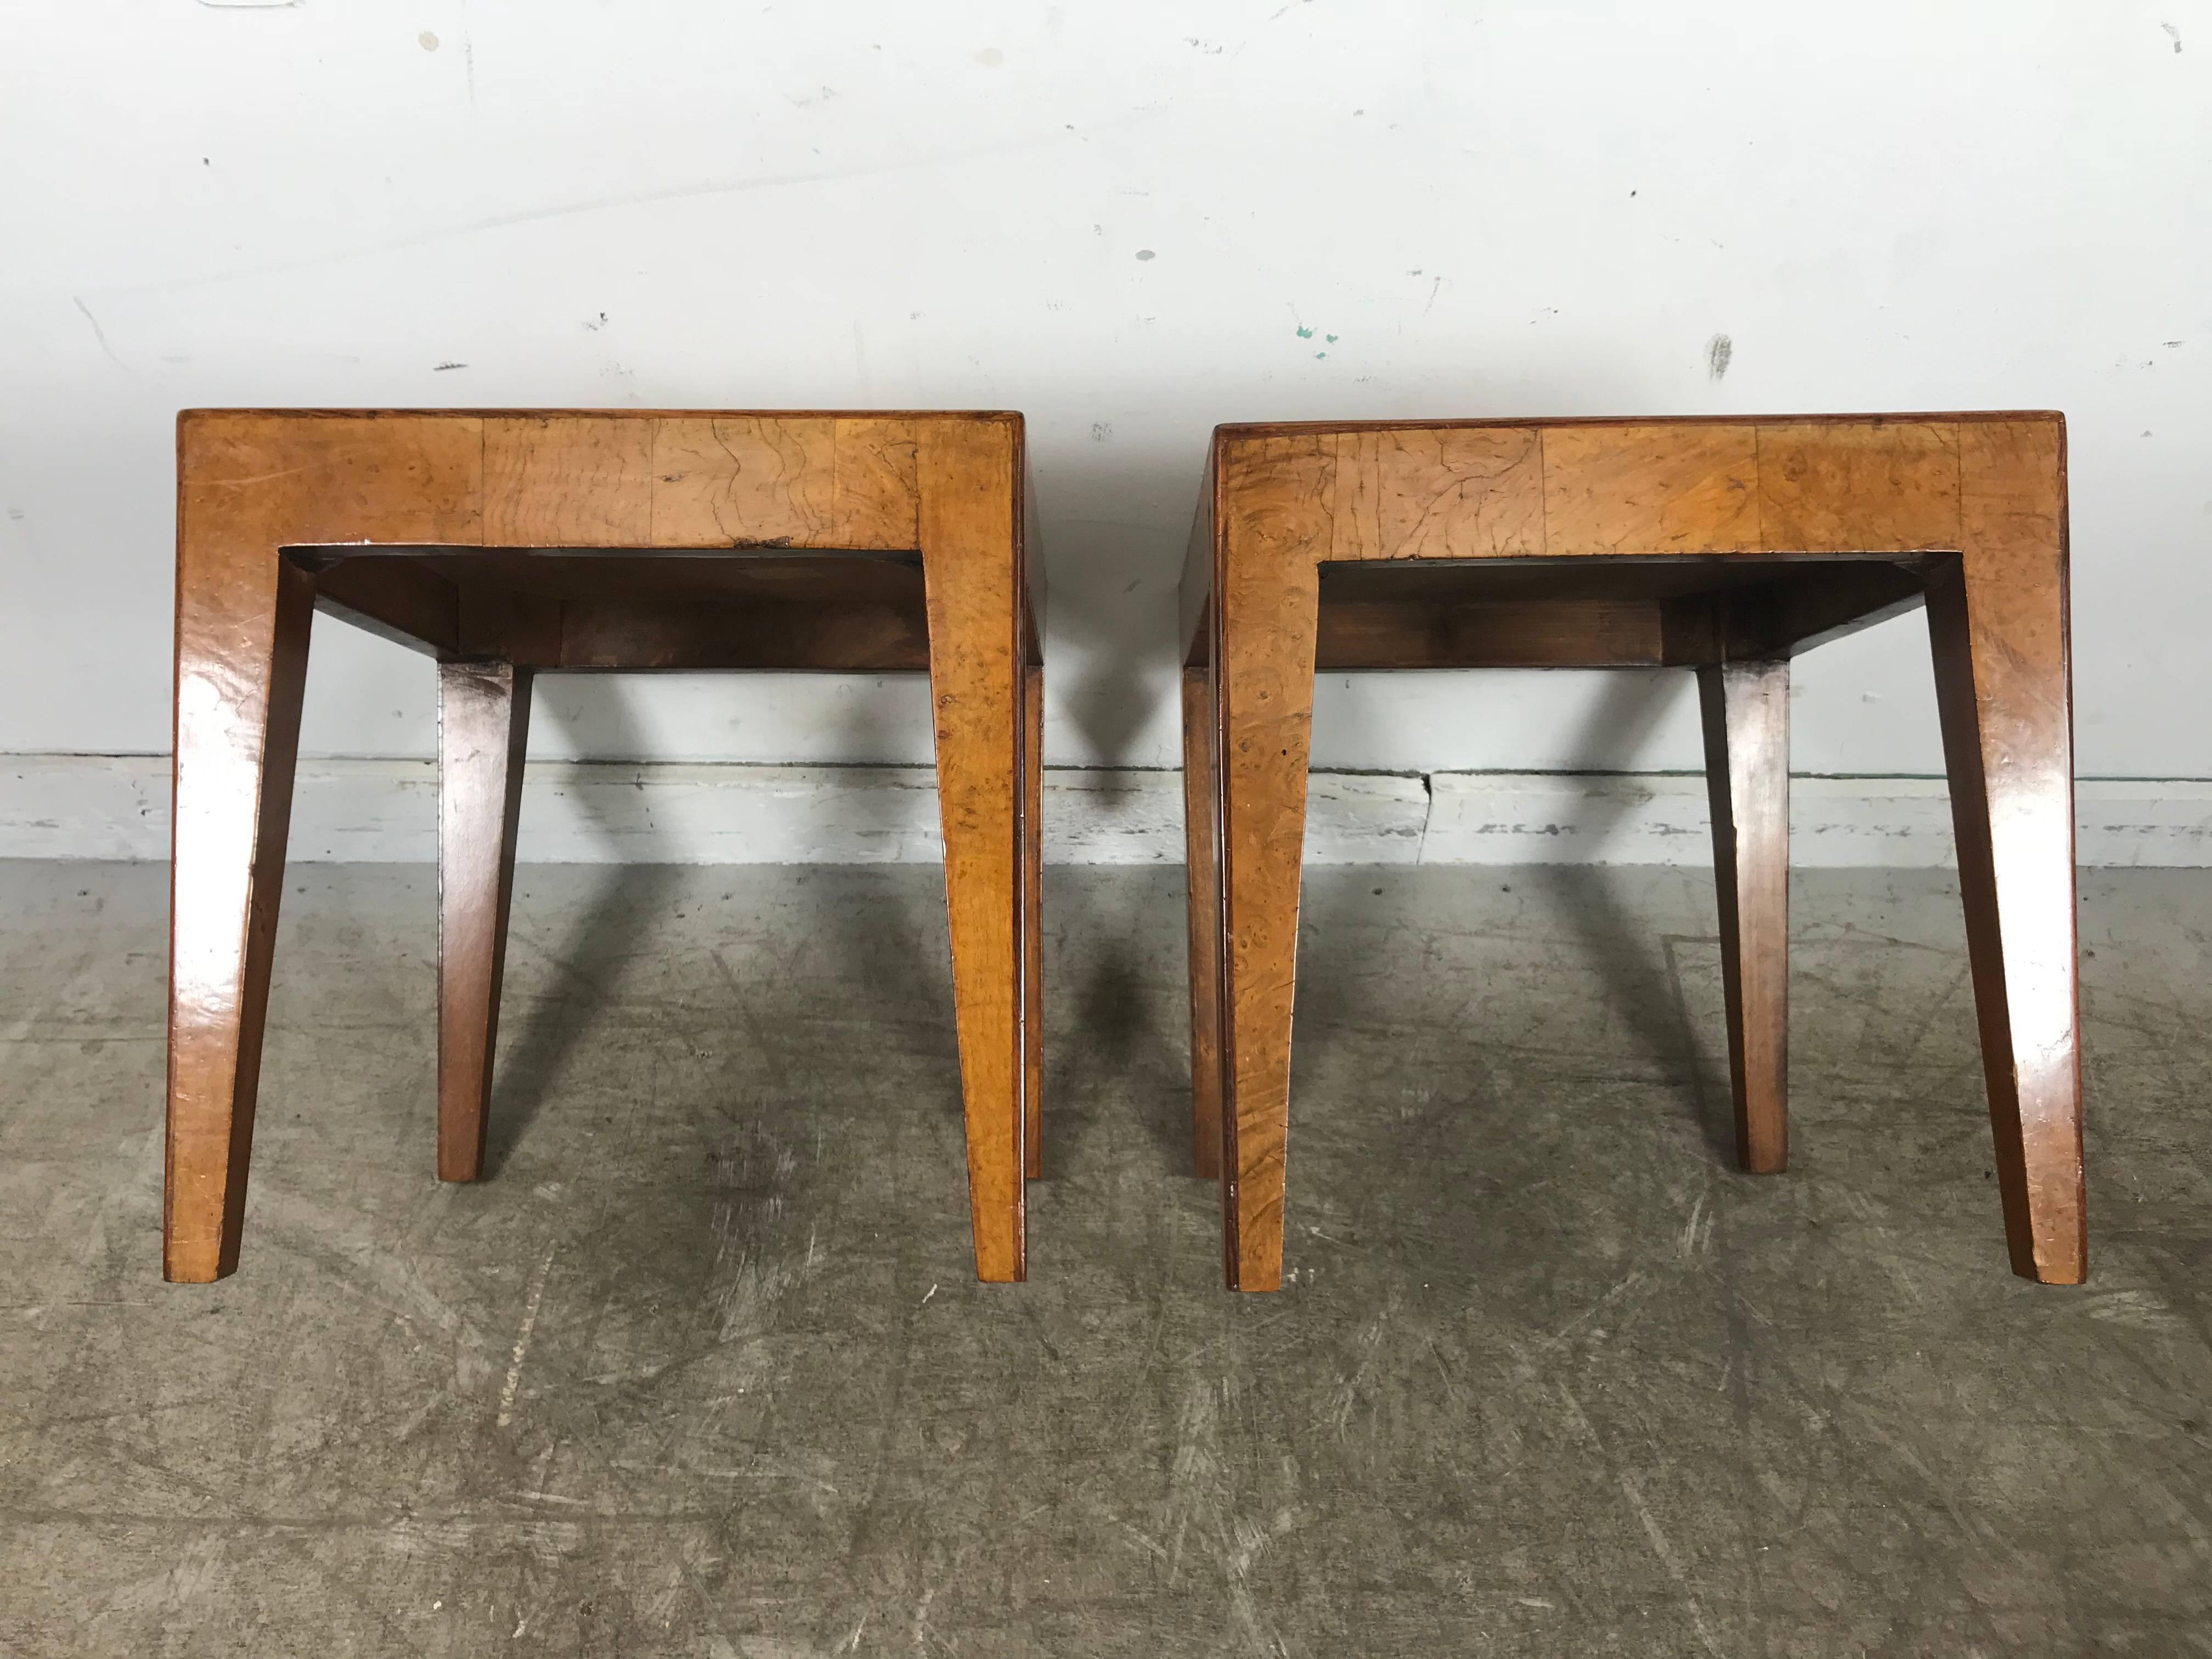 Pair of Elm Burl Wood Italian Modernist Tables 1940s after Willy Rizzo 6